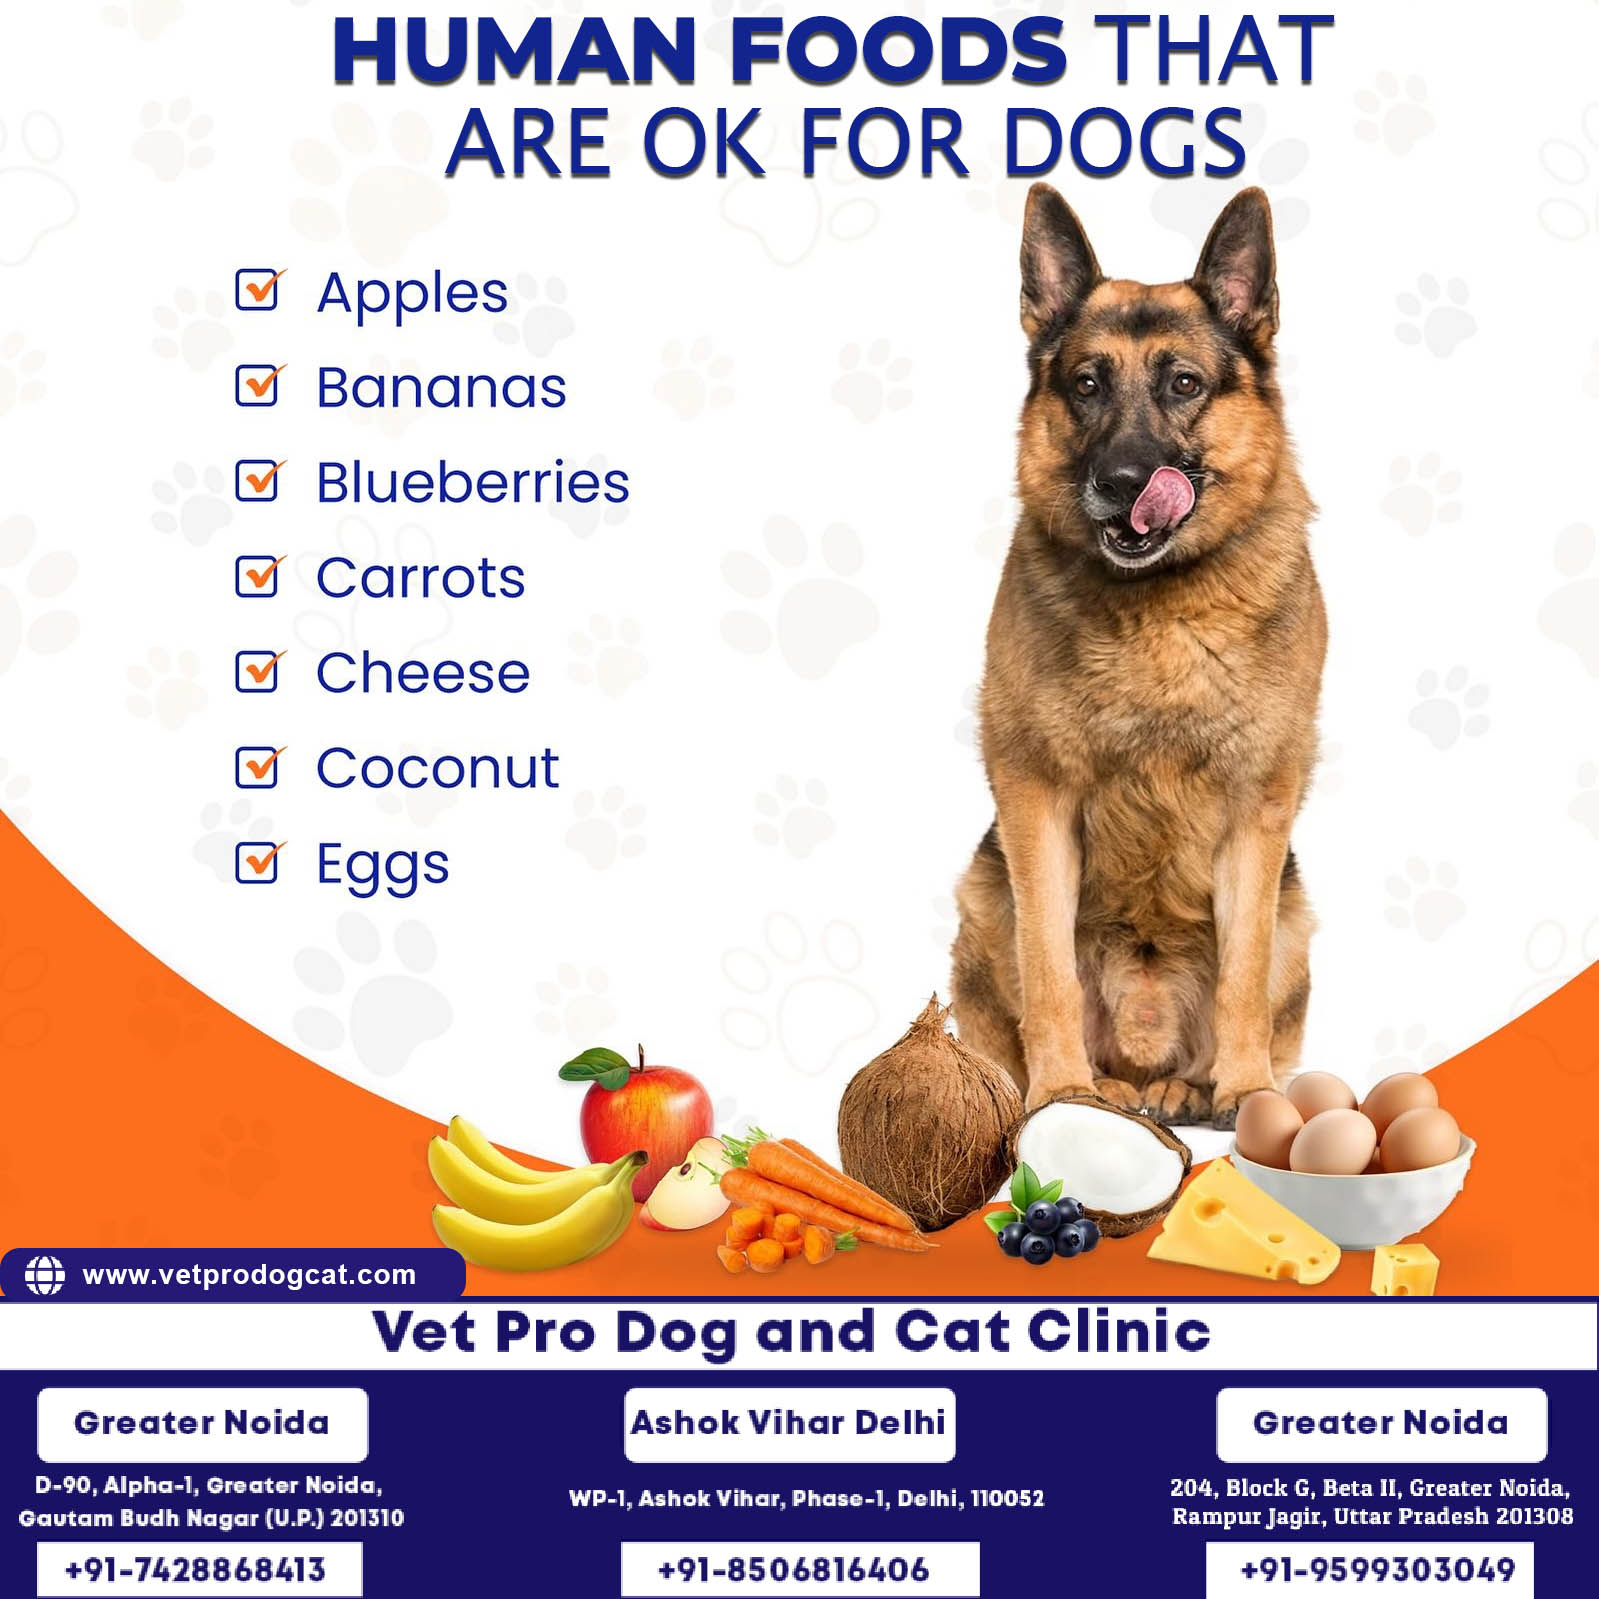 Human food that are ok for dogs